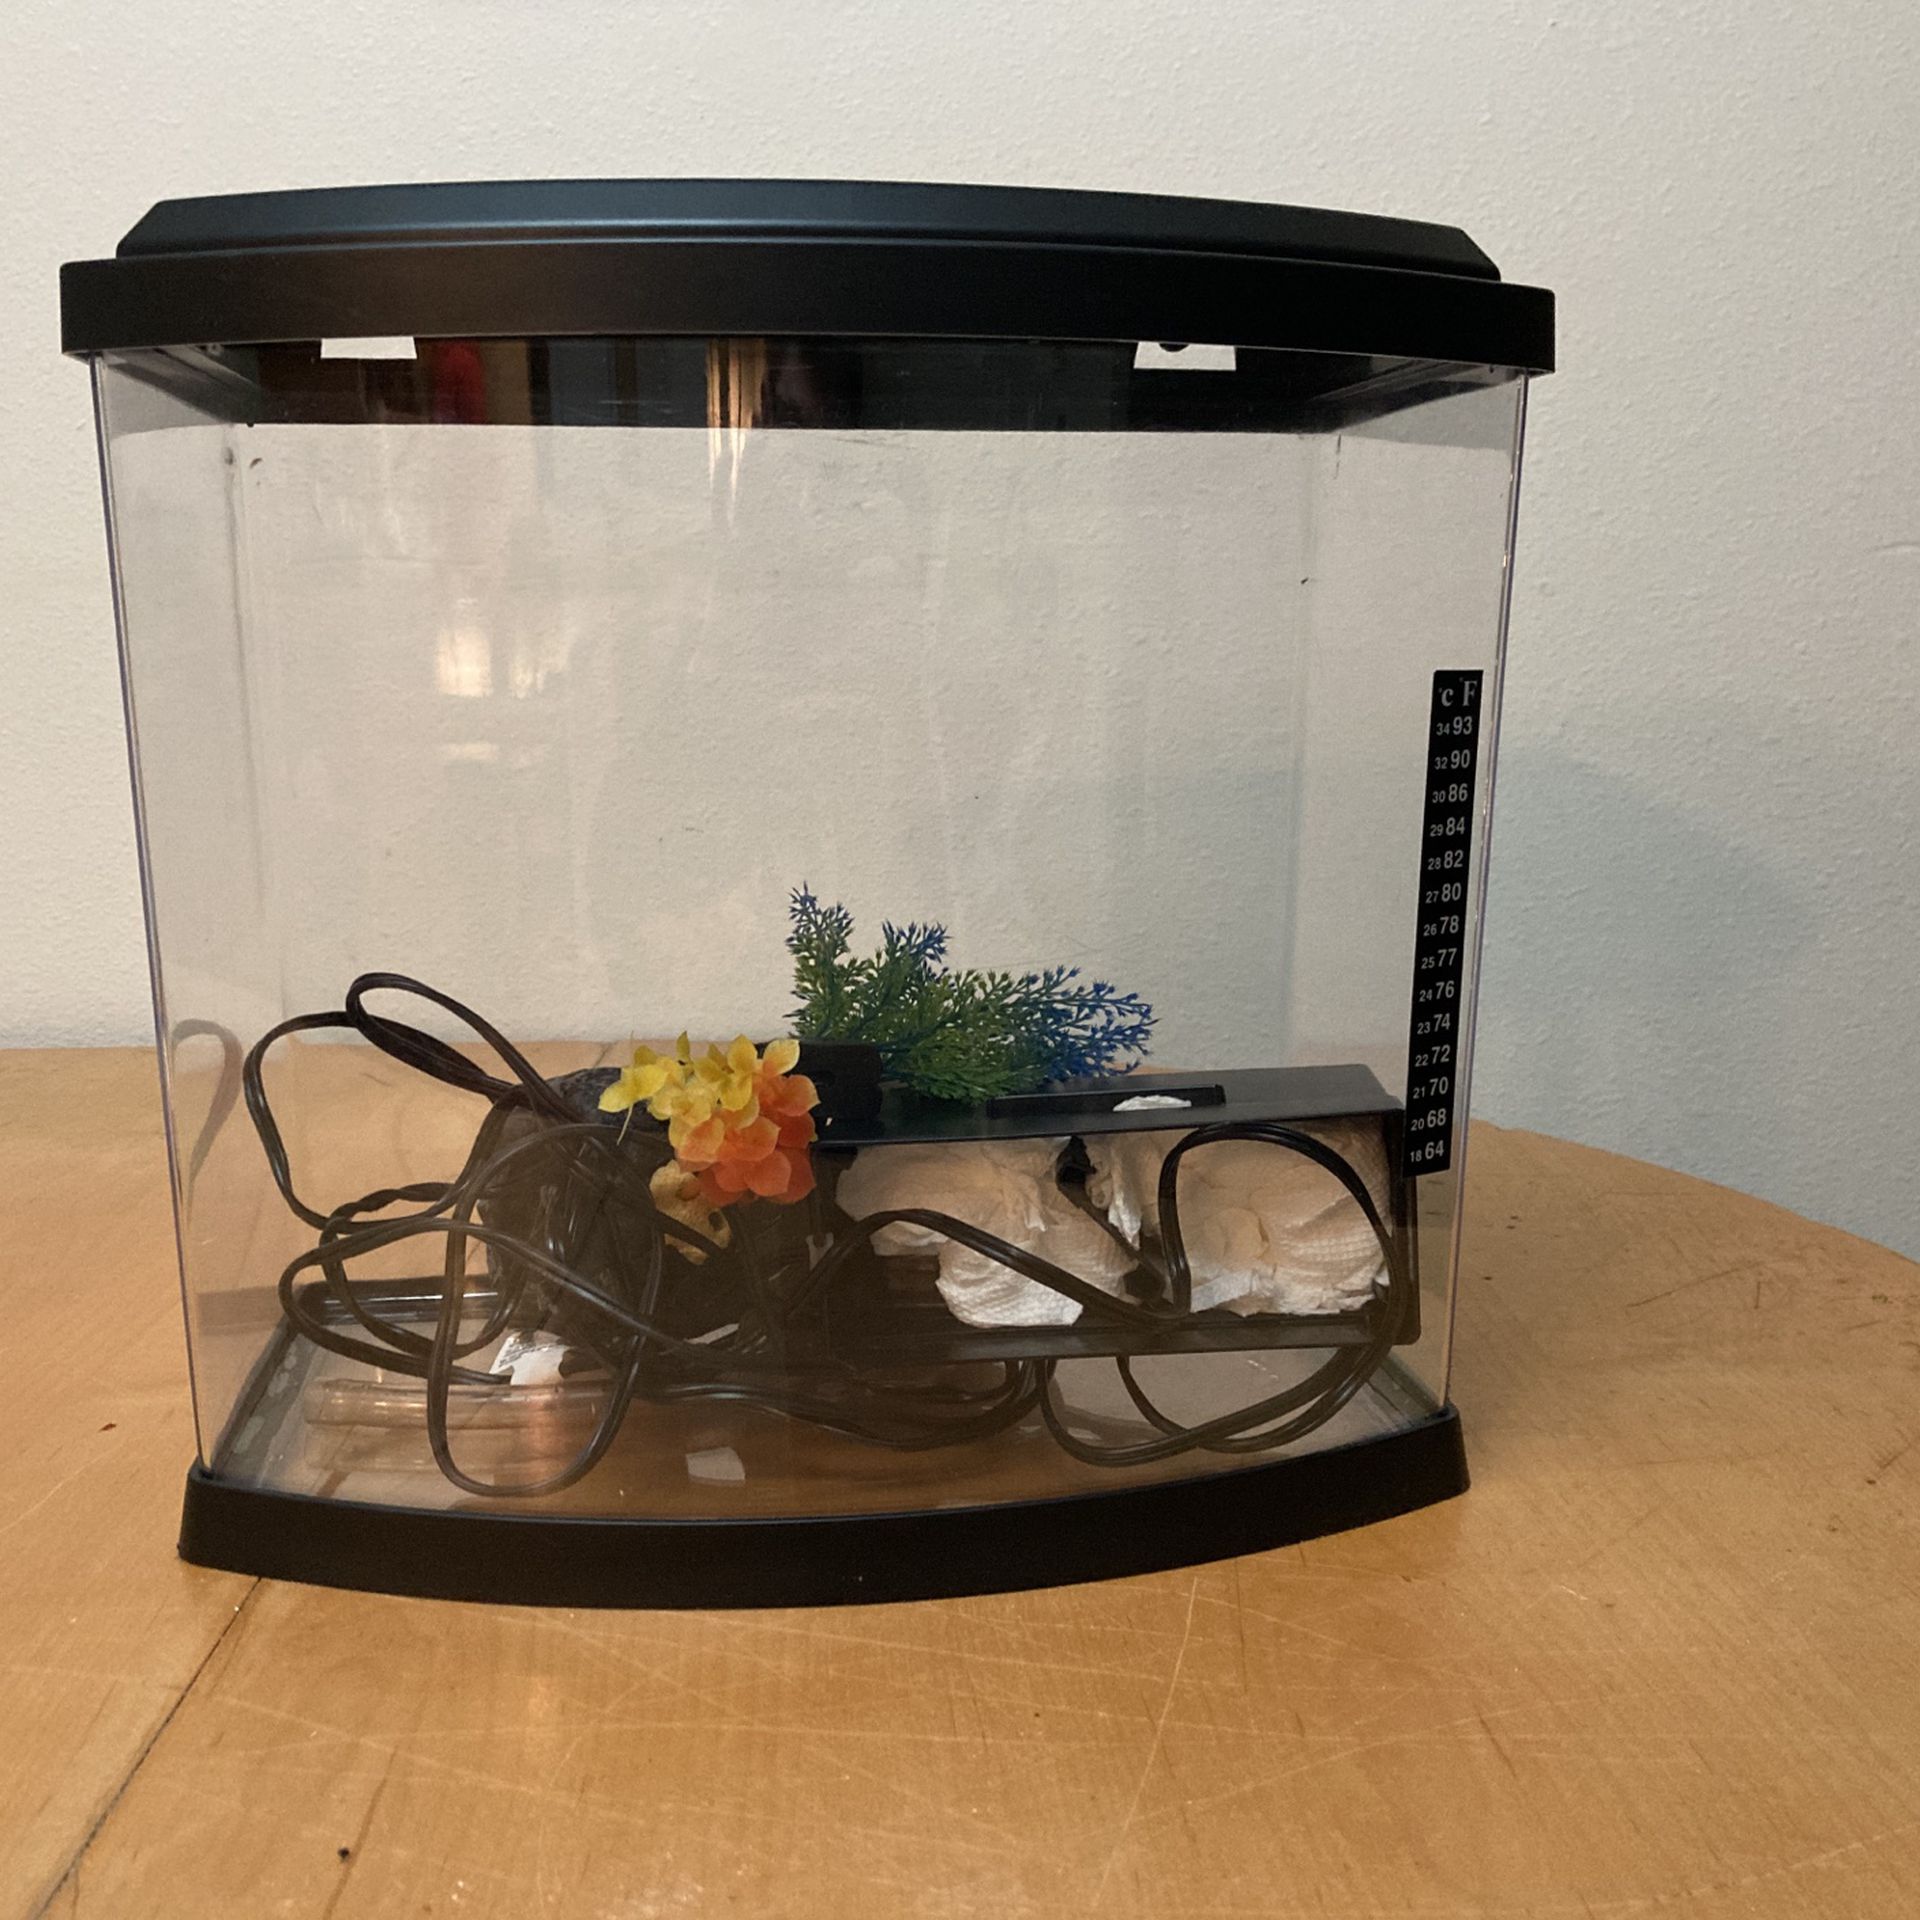 5 Gallon Fish Tank WYSIWIG With COVID Supplies